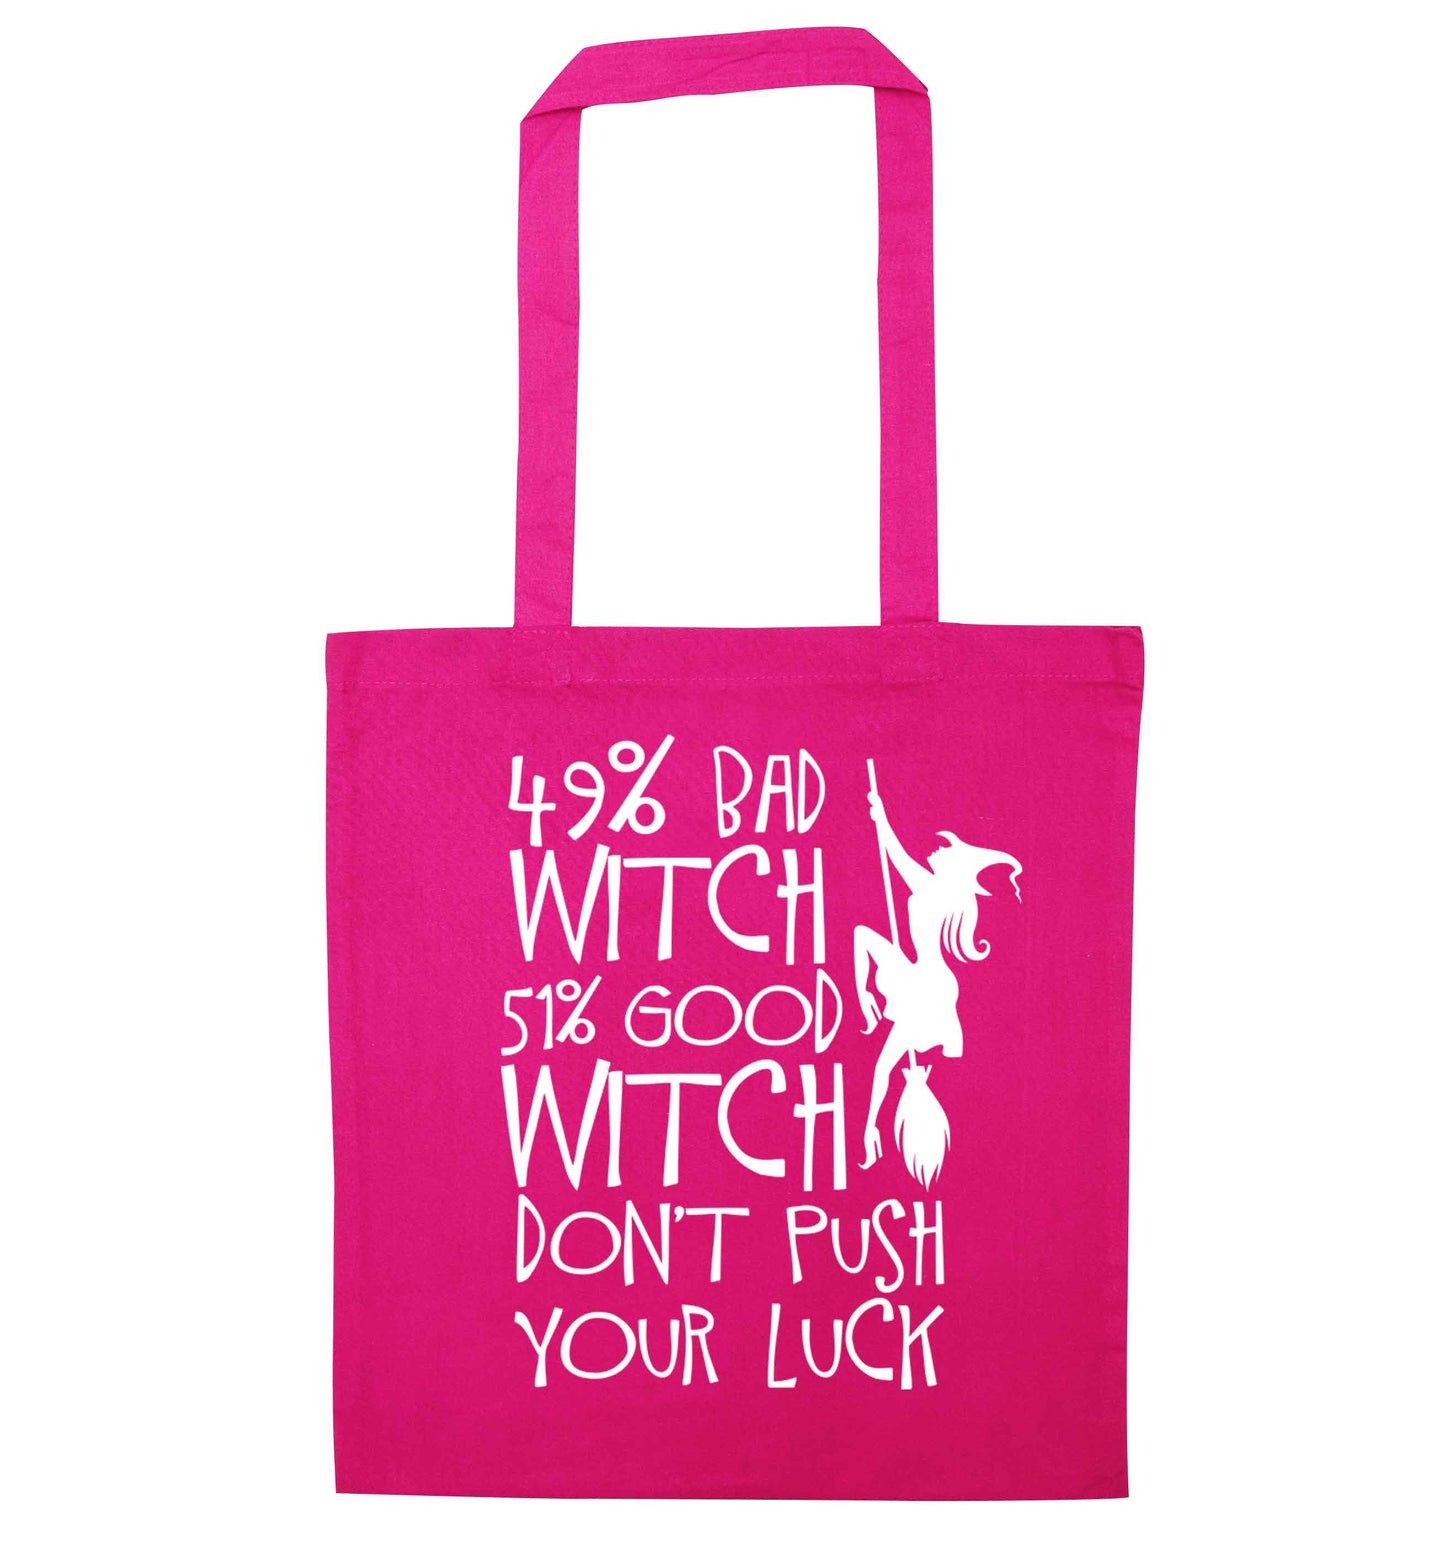 49% bad witch 51% good witch don't push your luck pink tote bag